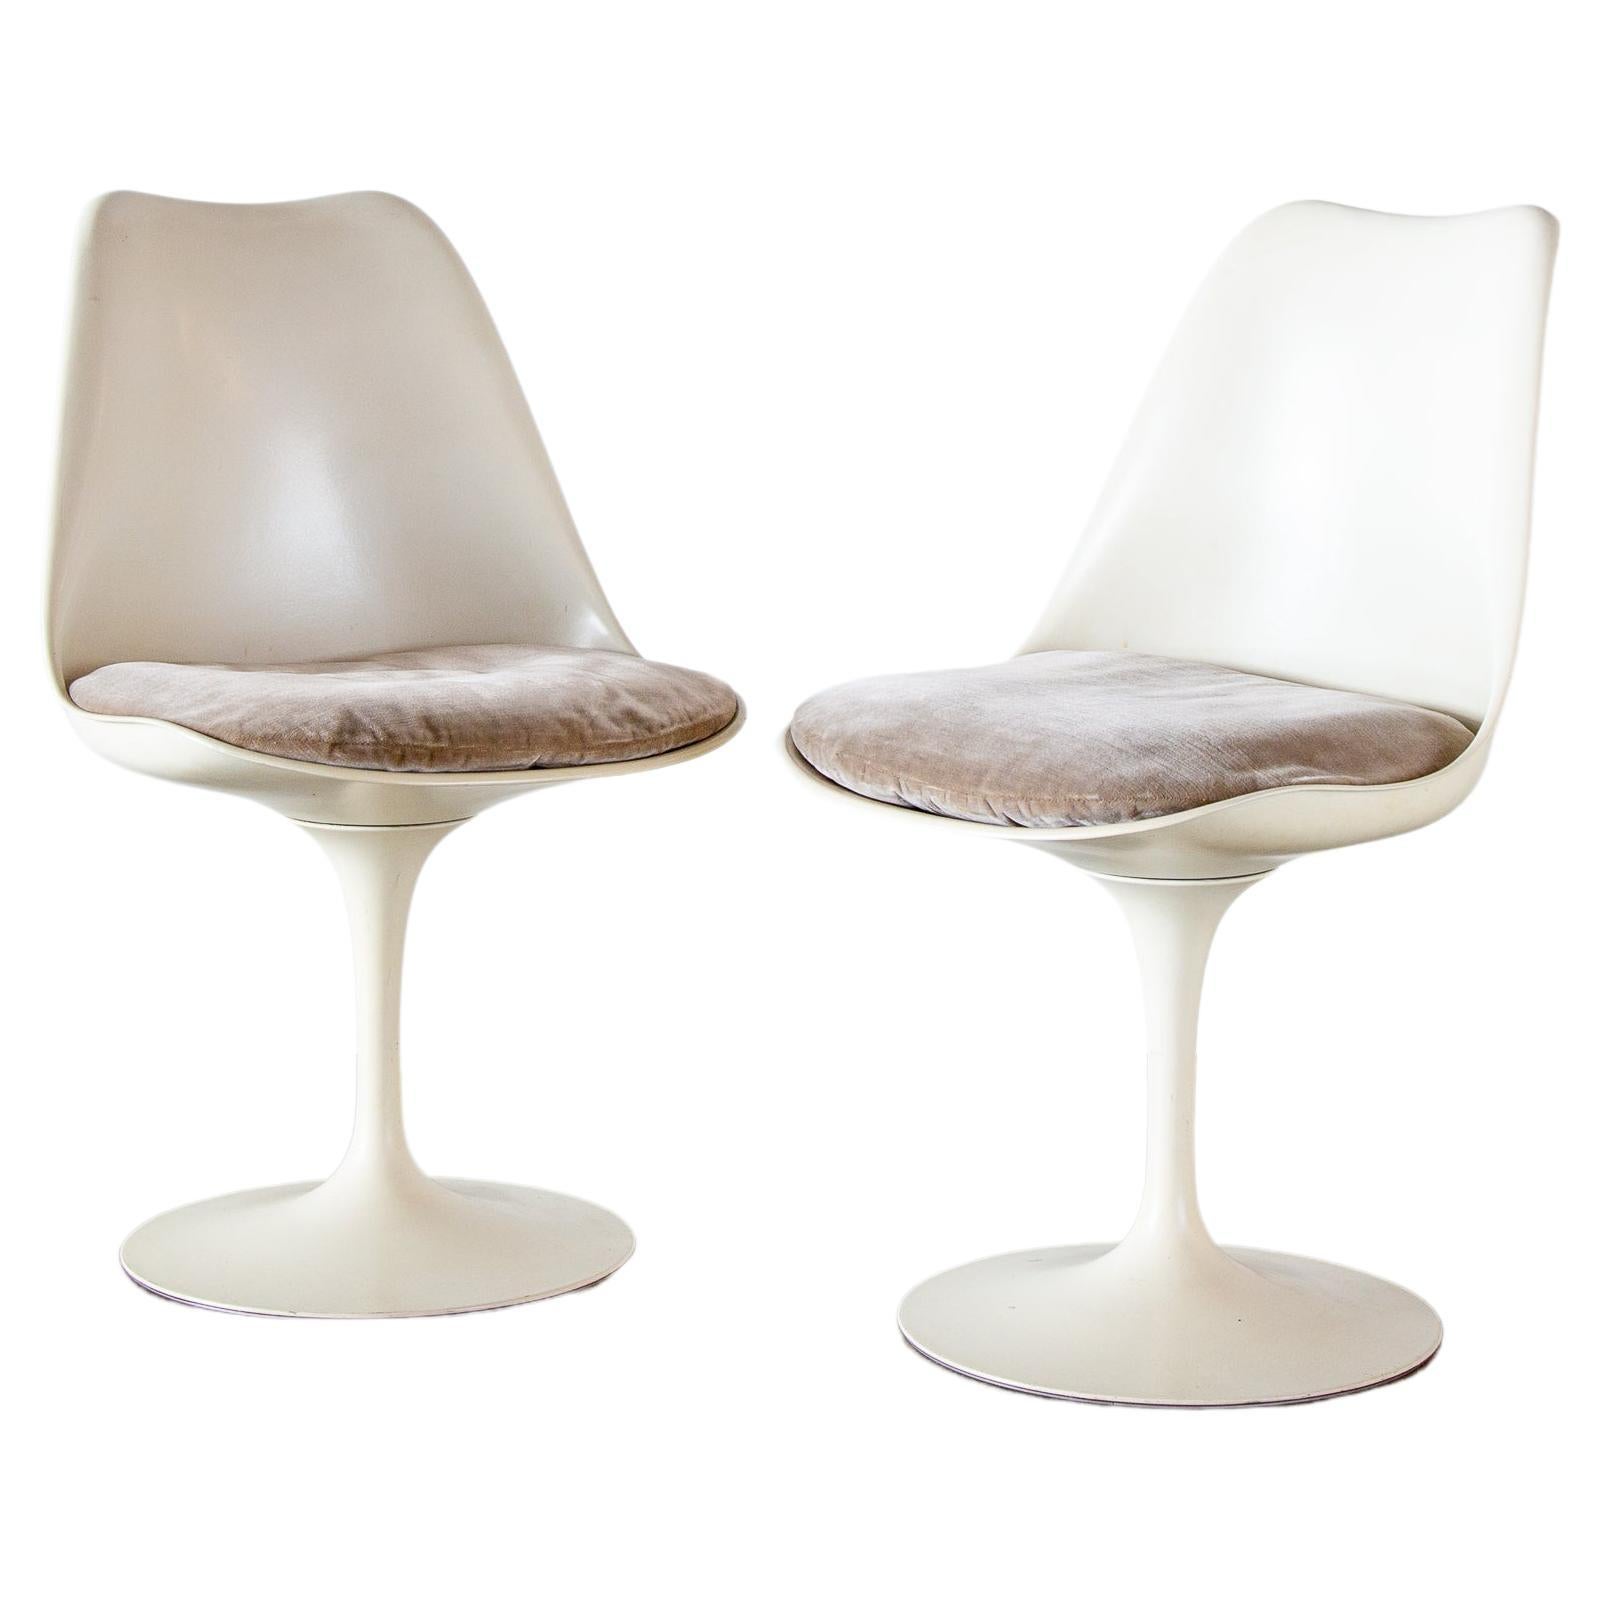 1950s Early Tulip Swivel Chairs by Eero Saarinen for Knoll - a pair For Sale